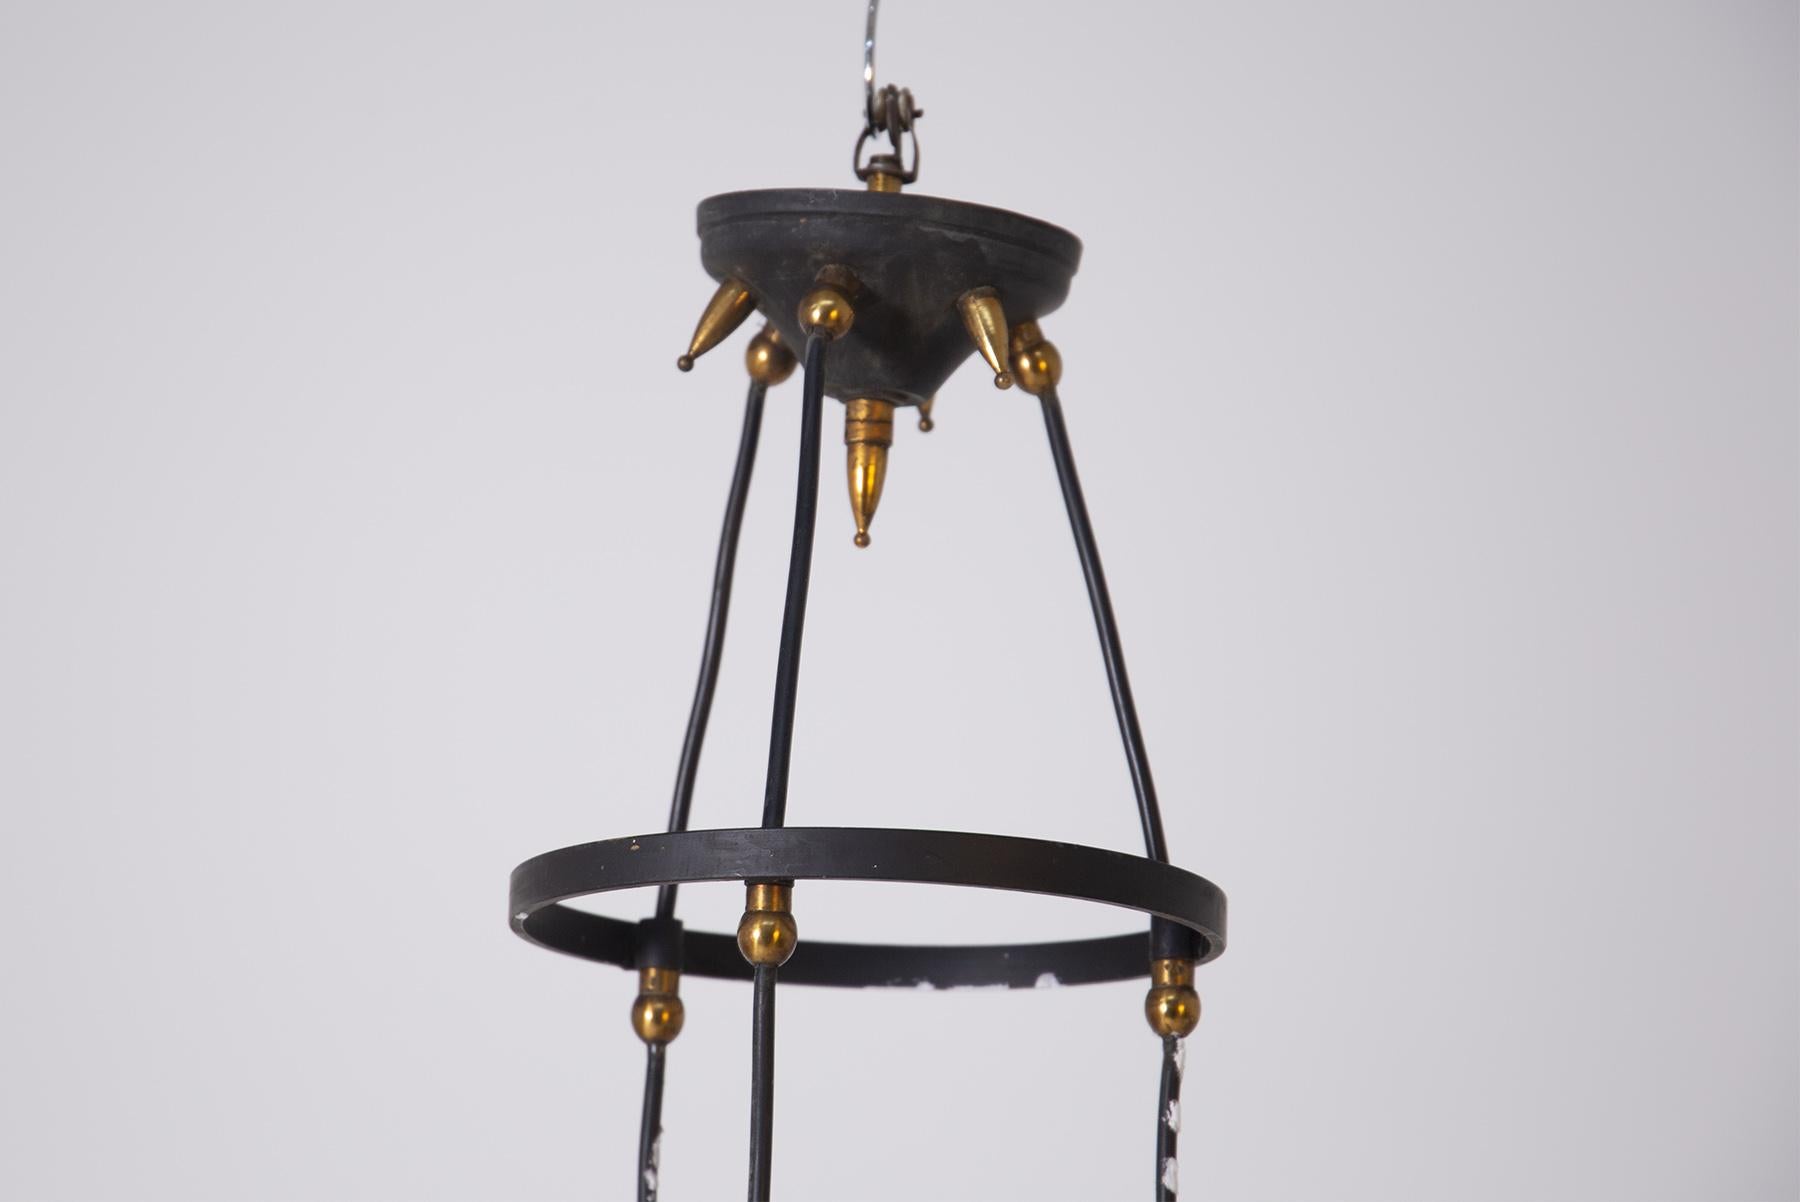 Pendant by Vistosi in colored opaline glass with 3 lights. The structure that supports the lamp holders is made of painted iron with ornamental elements in chrome-plated brass. The various connecting elements are also in brass. The three lamp